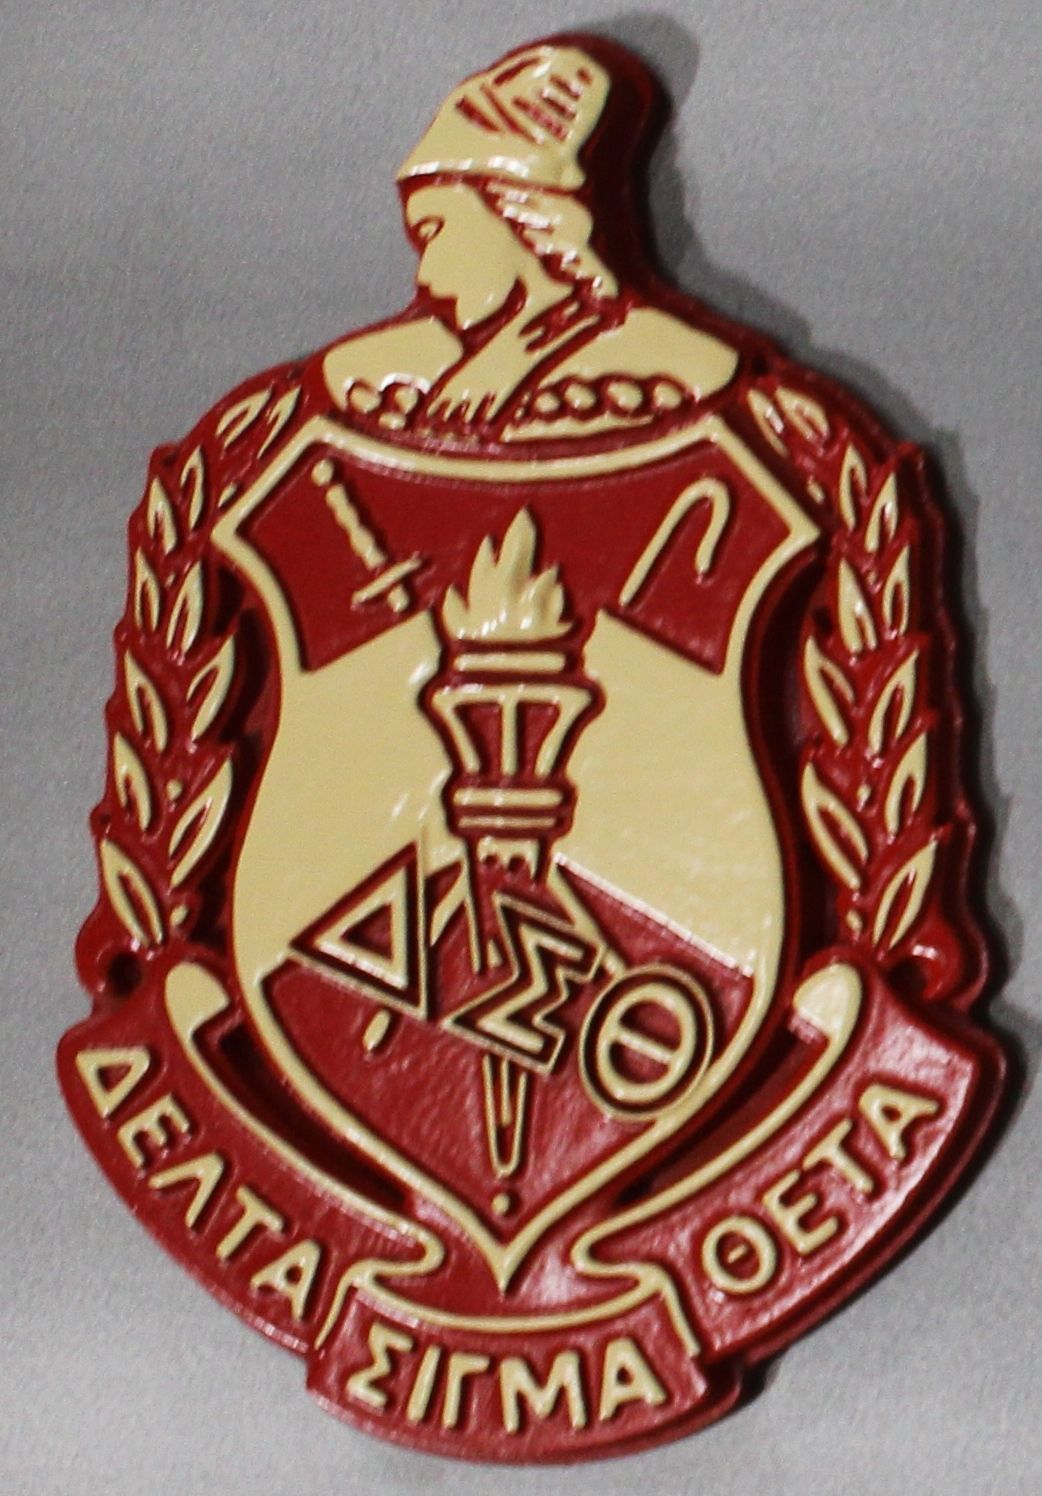 SP-1620 - Carved 2.5-D  HDU Plaque of the Coat-of-Arms of the Delta Sigma Theta Sorority